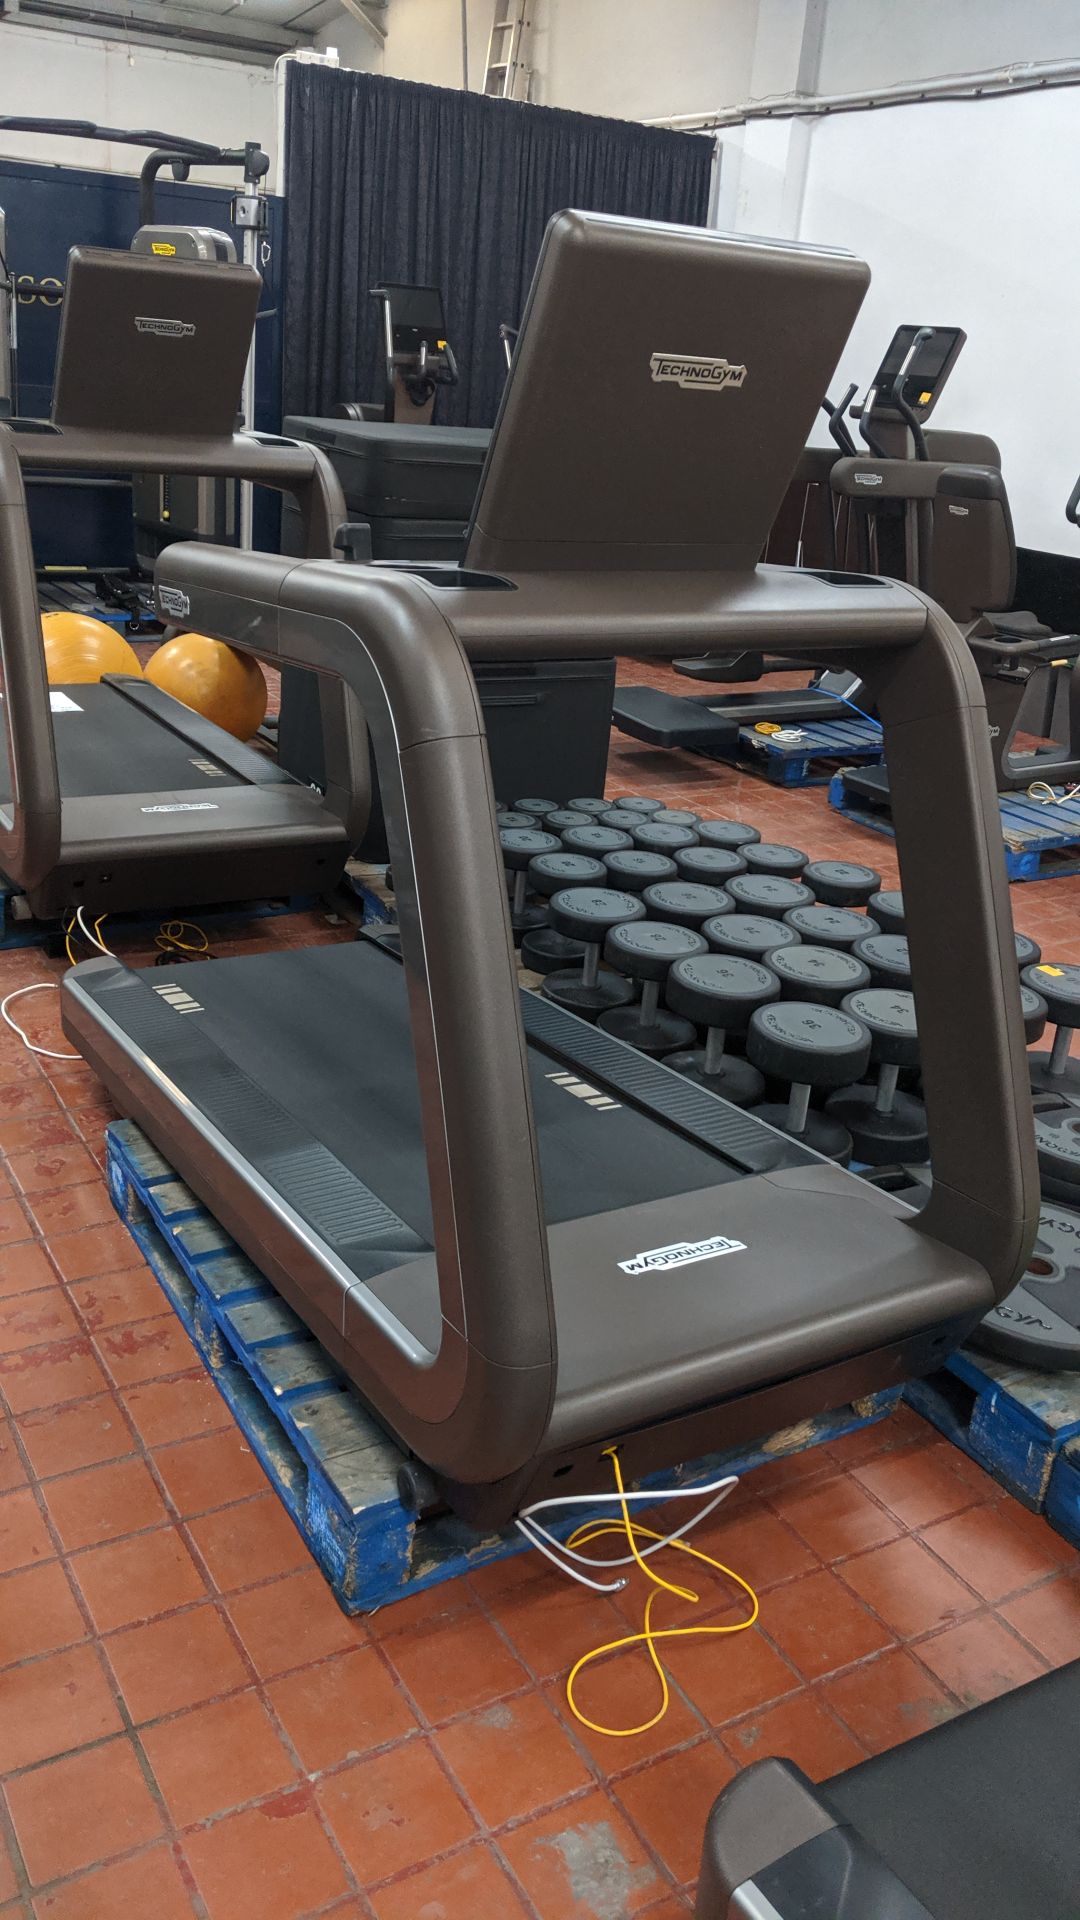 Technogym Artis treadmill Purchased new in 2016 - refurbished/recommissioned by Technogym - please - Image 9 of 13